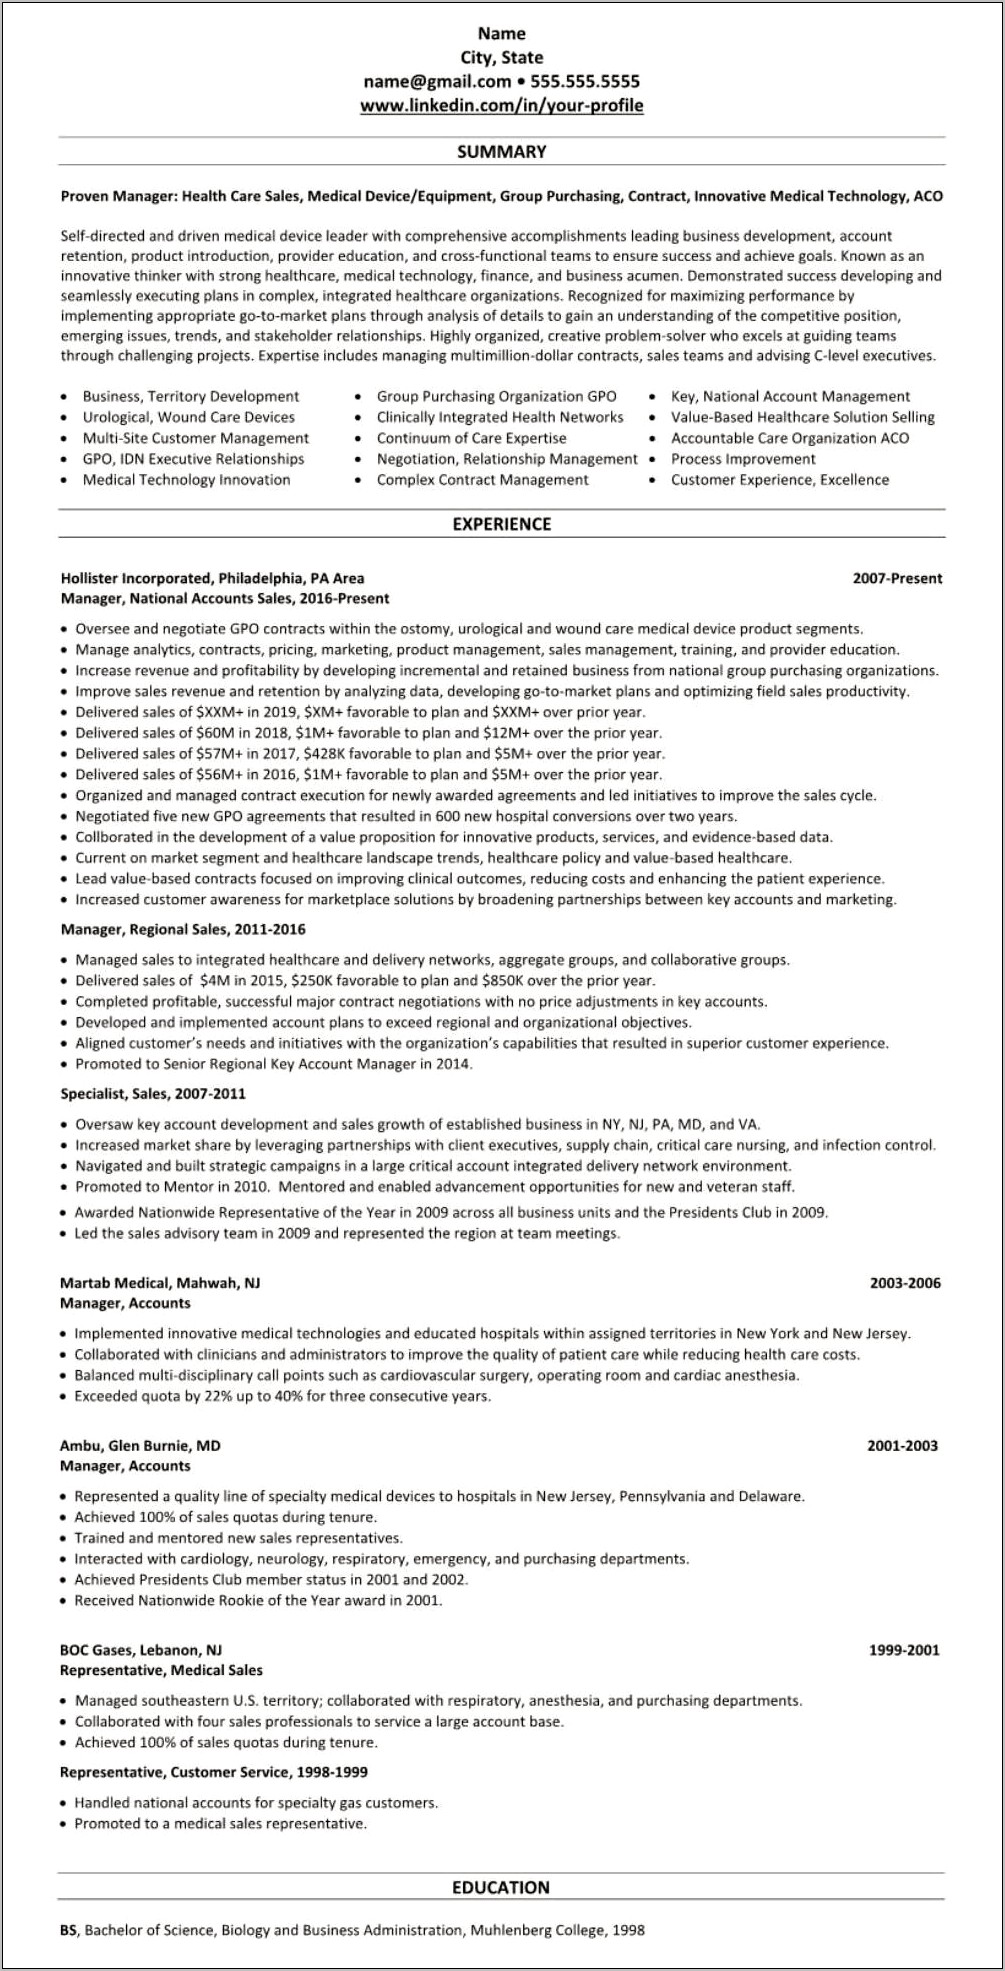 Resume Medical Device Project Manager Fda